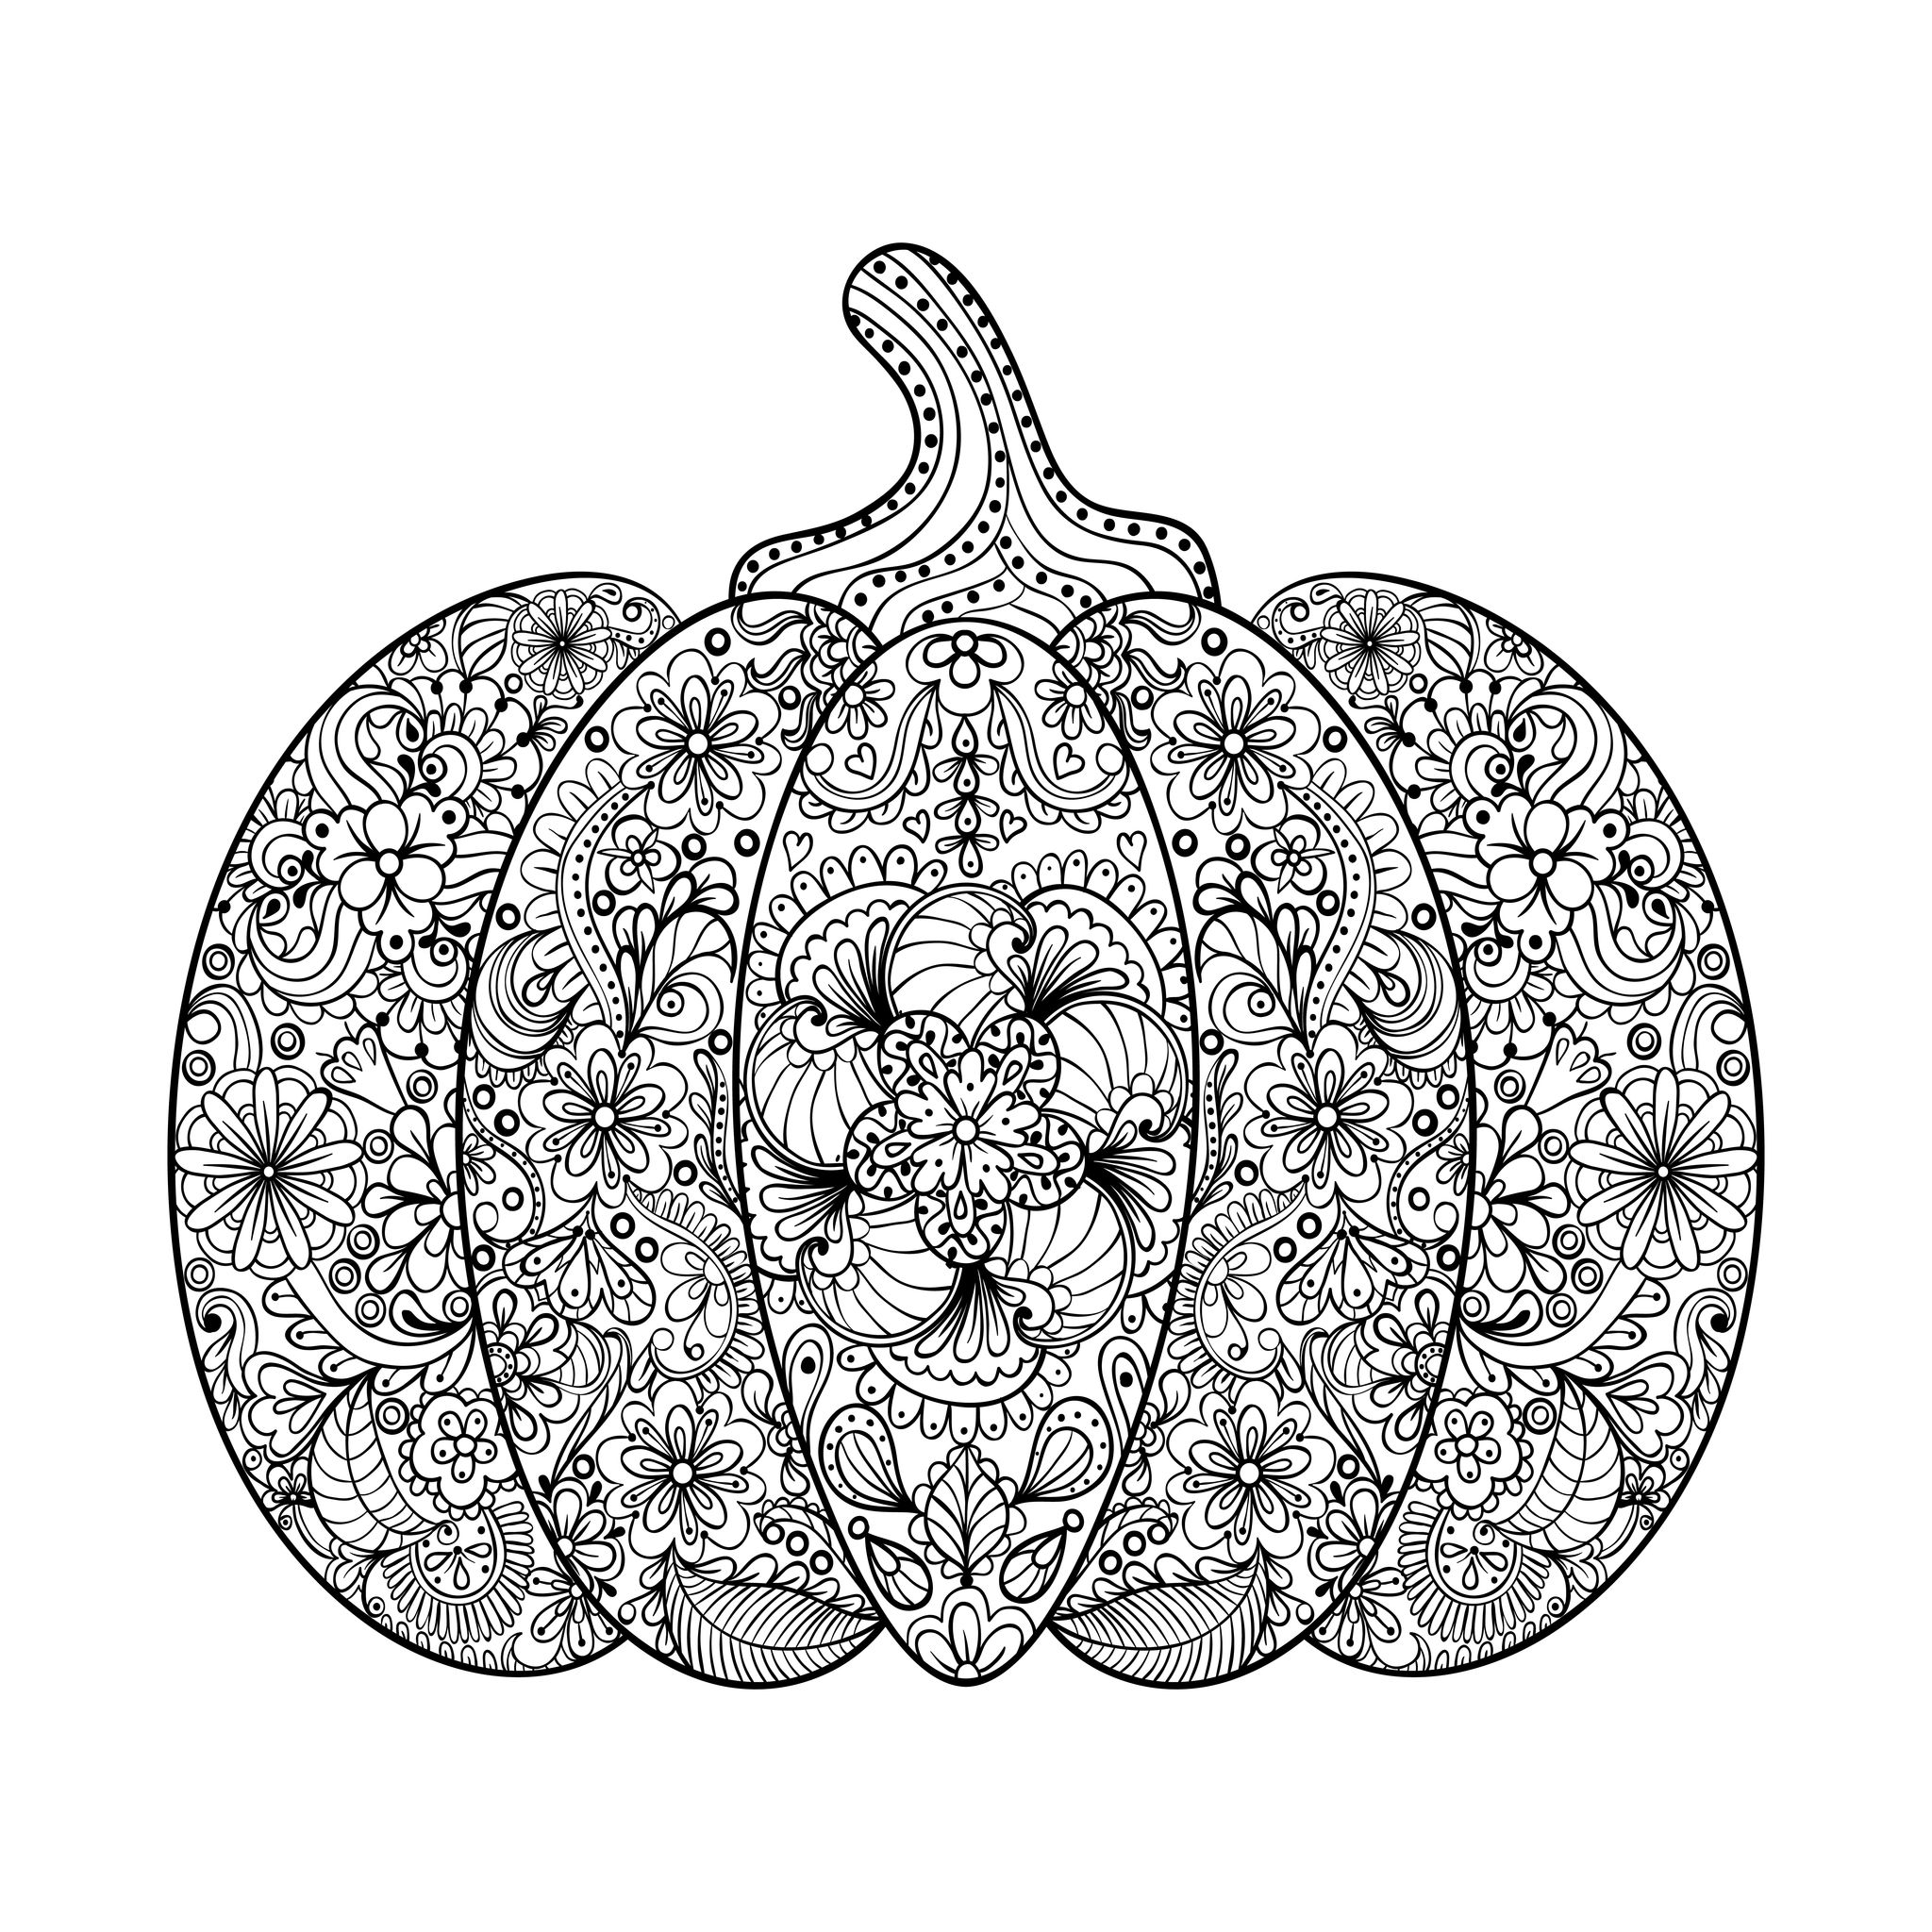 pumpkin-with-a-lot-of-details-to-color-halloween-kids-coloring-pages